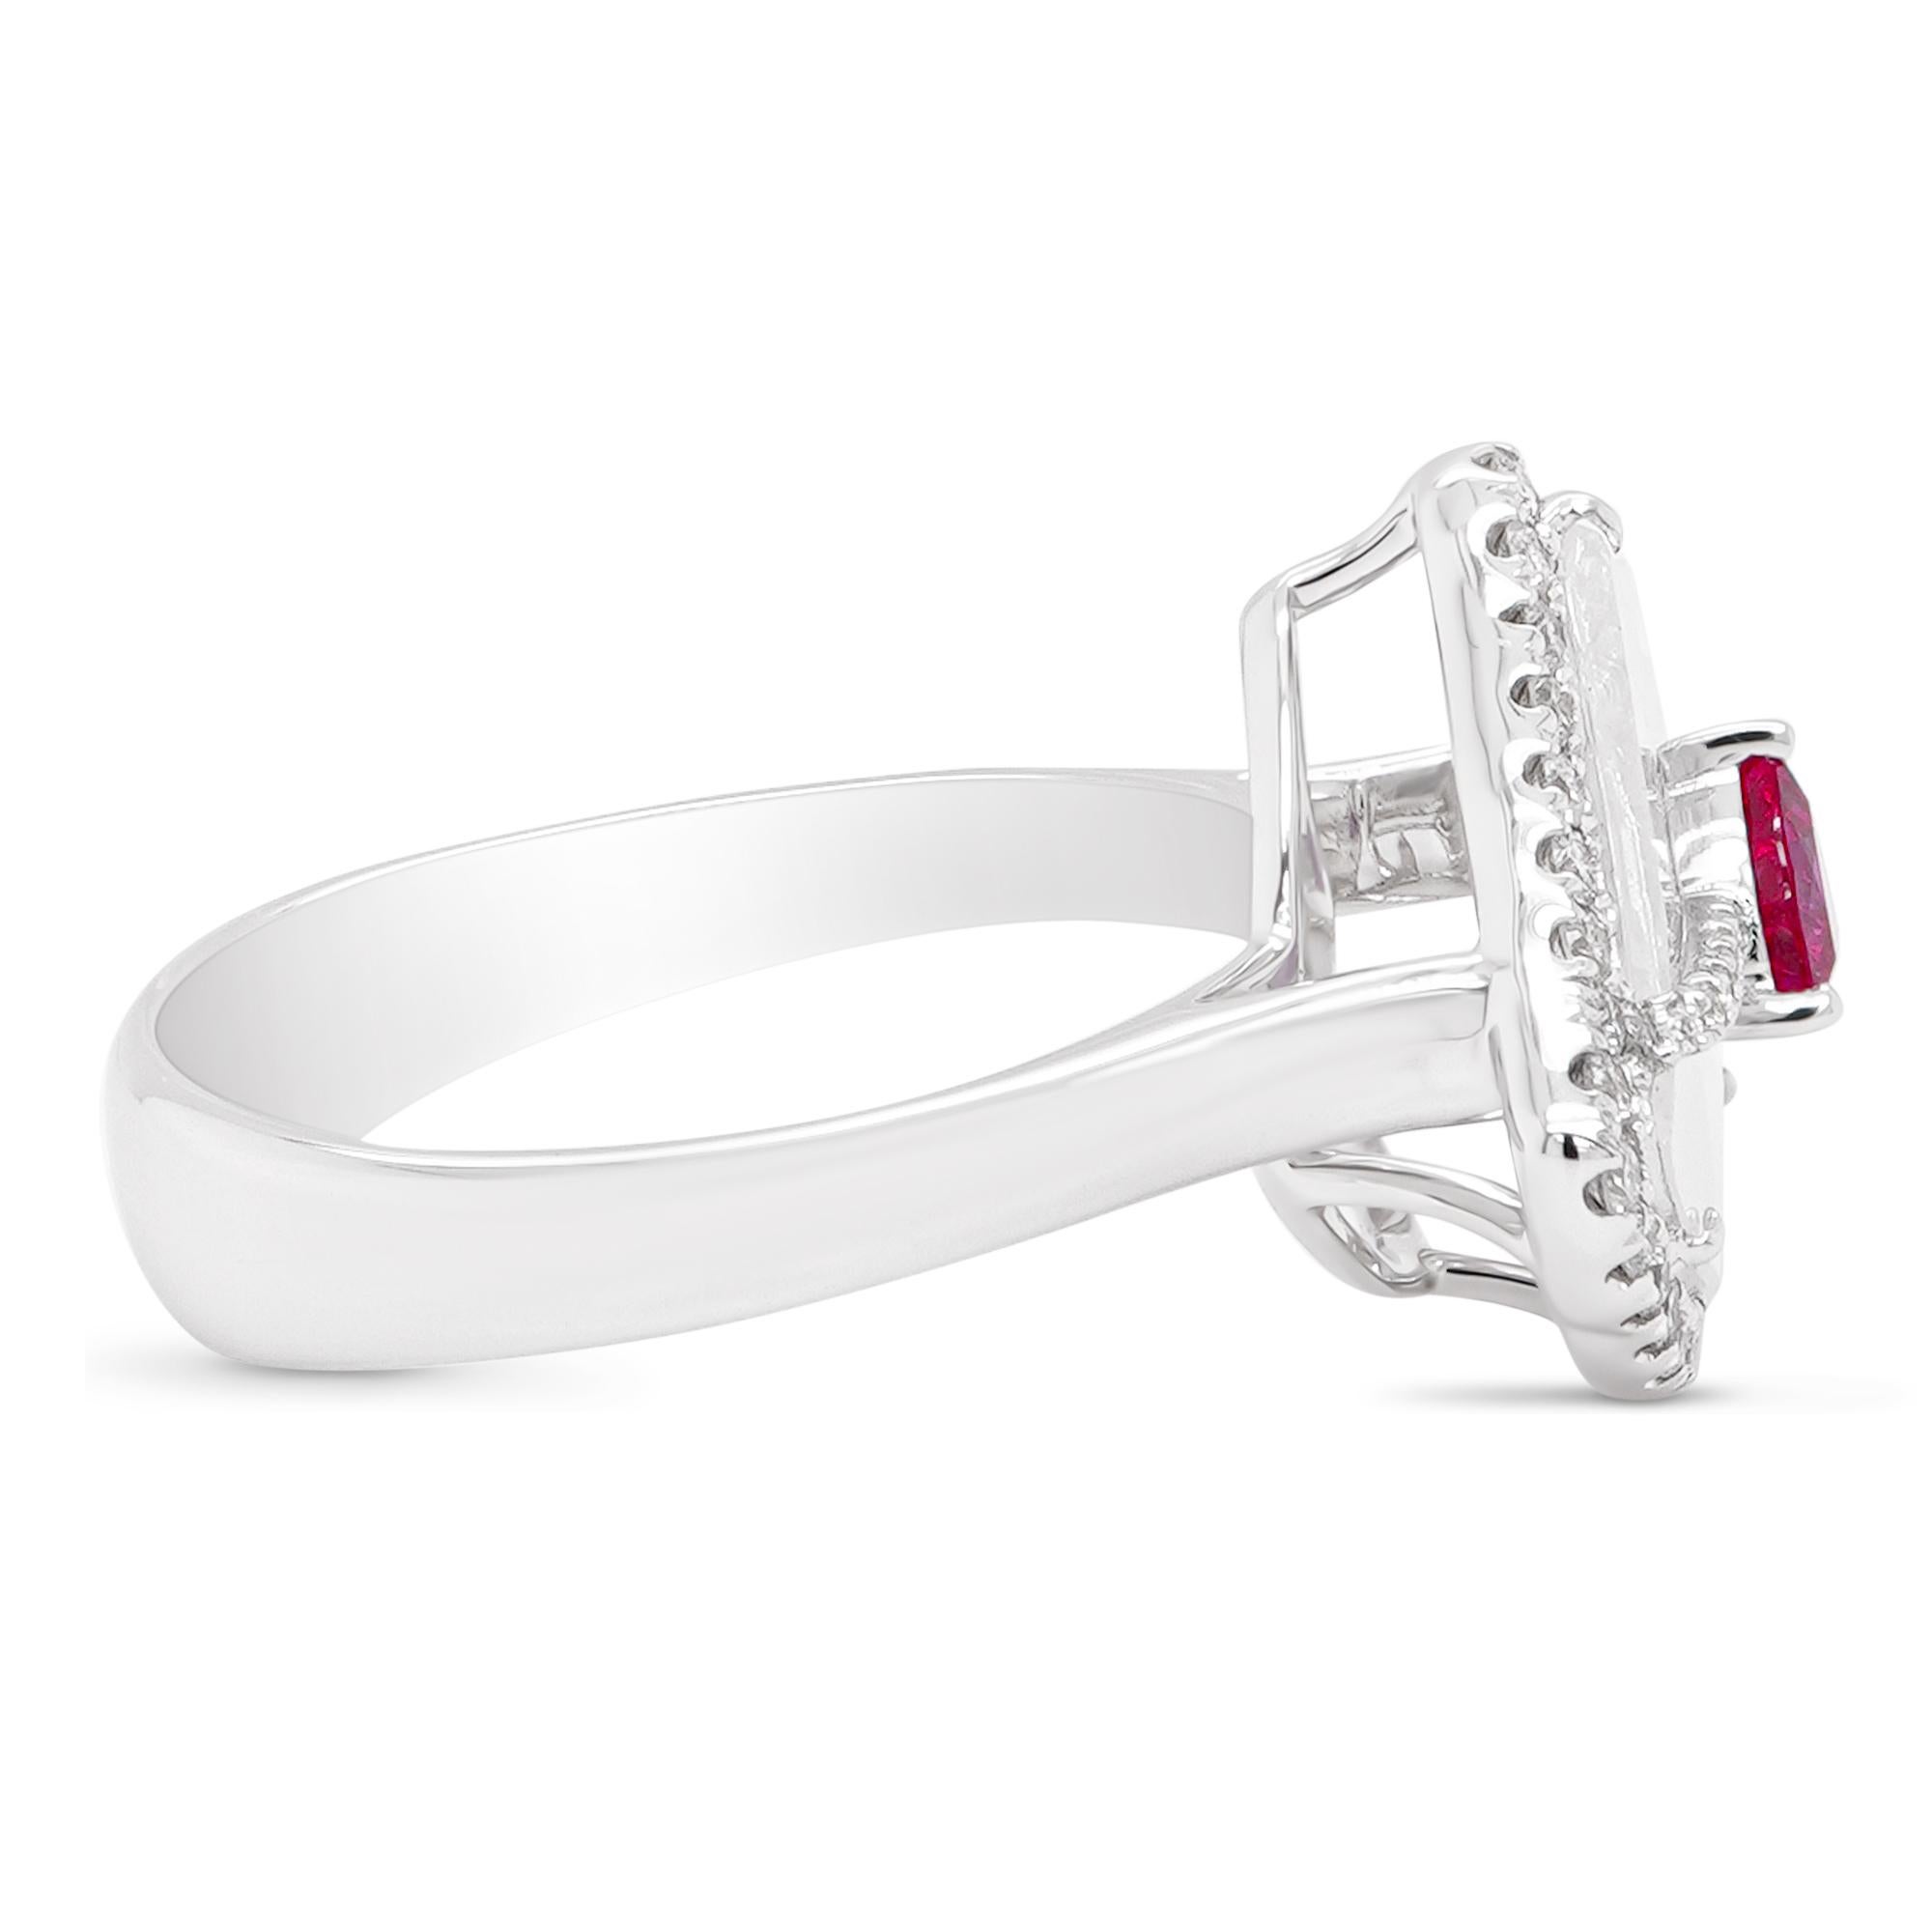 Crimson red ruby weighing 0.28 carats is sitting on top of a 1.01 carat Glacier color diamond as a crown in this designer 18K ring. A total of 0.27 carats of white round brilliant diamonds are set as well. The details of the diamond are mentioned